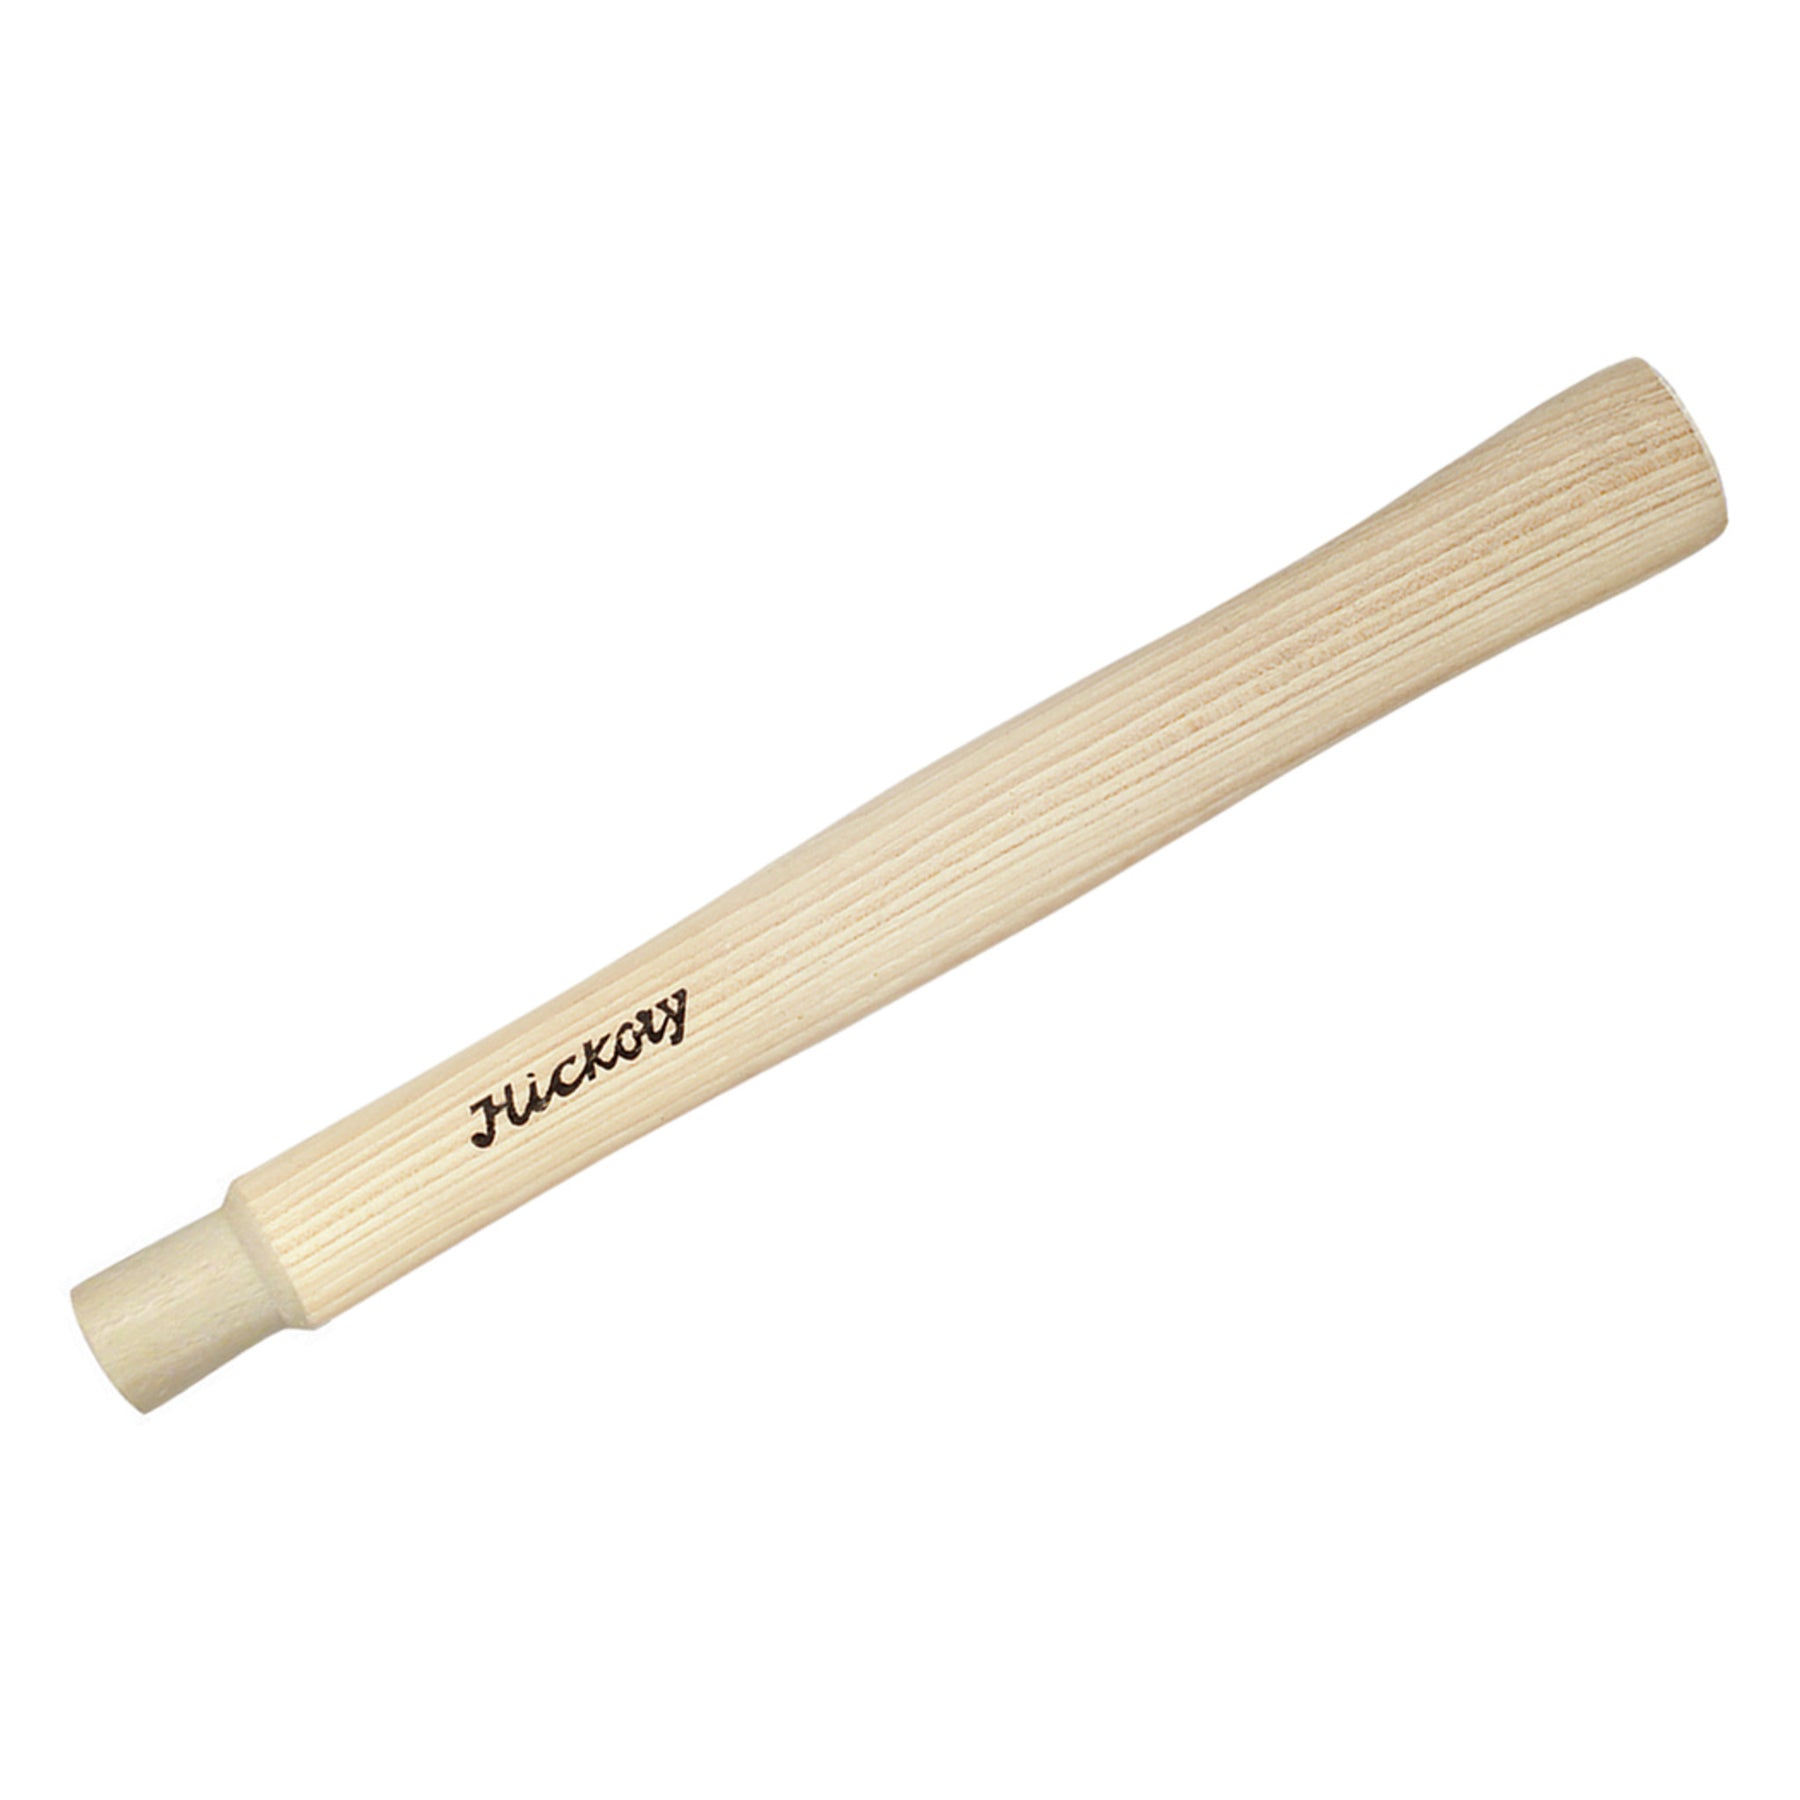 Mallet Hickory Replacement Handle 11.0"